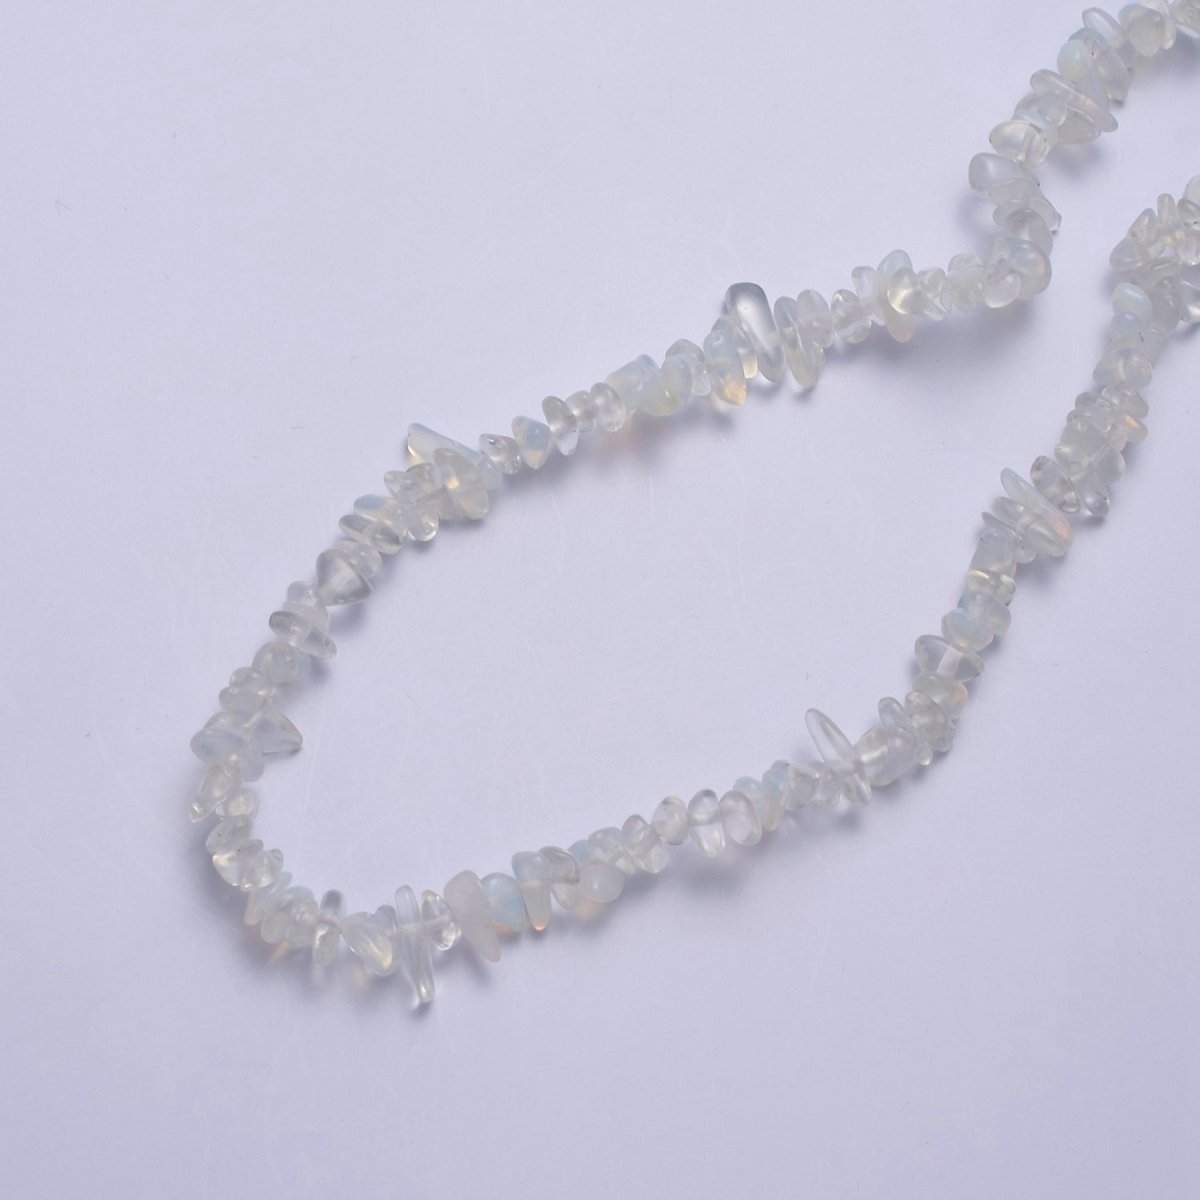 17.2 Inch Natural Clear White Opalite Crystal Stone Bead Necklace with 2" Extender | WA-645 Clearance Pricing - DLUXCA